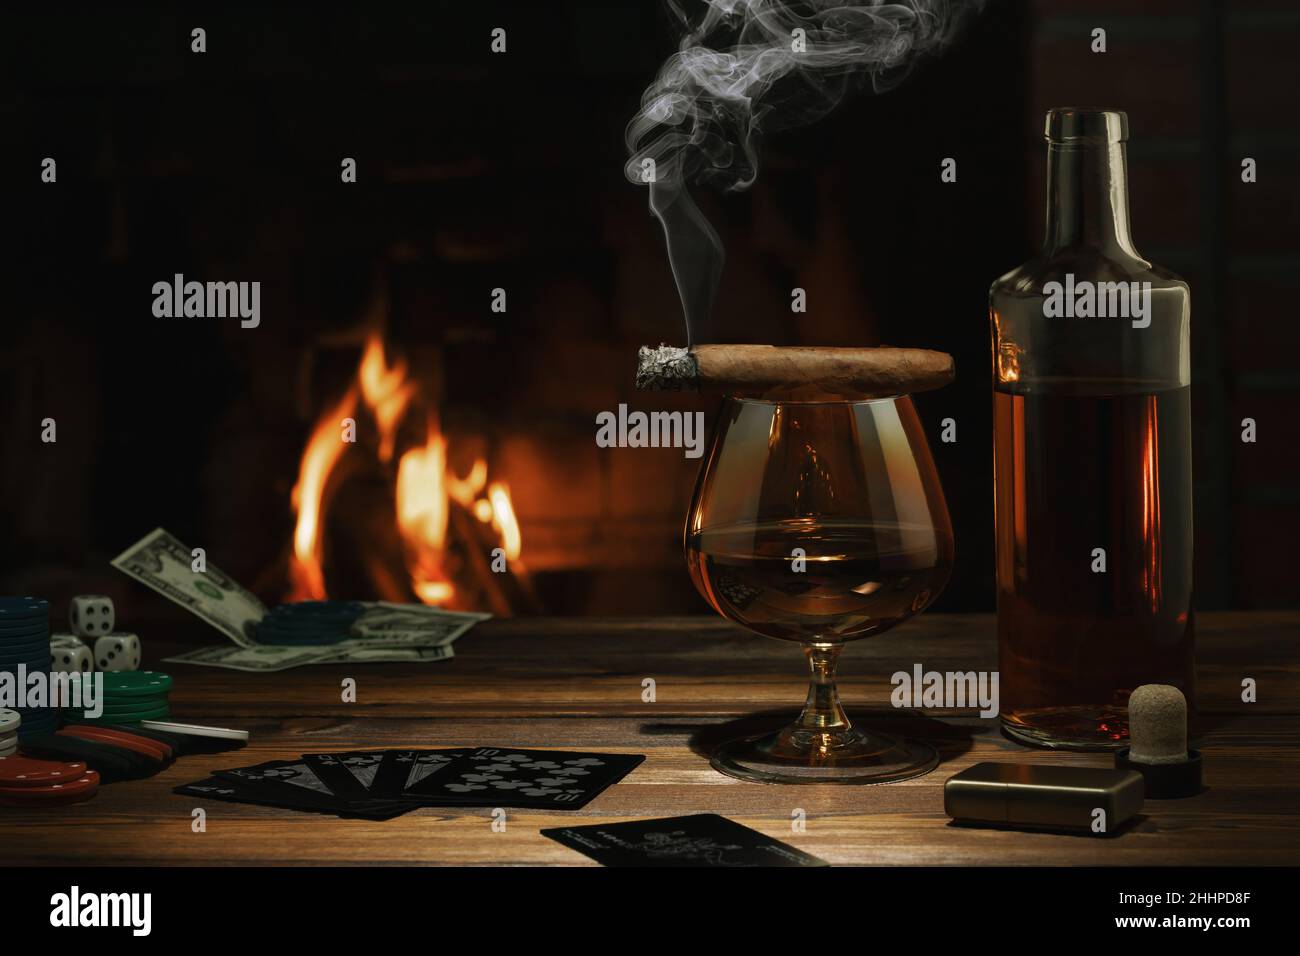 Glass of cognac, cigar, bottle, cards game and chips on the table near the burning fireplace. Rest, pleasure, good luck and dolce vita concept. Stock Photo